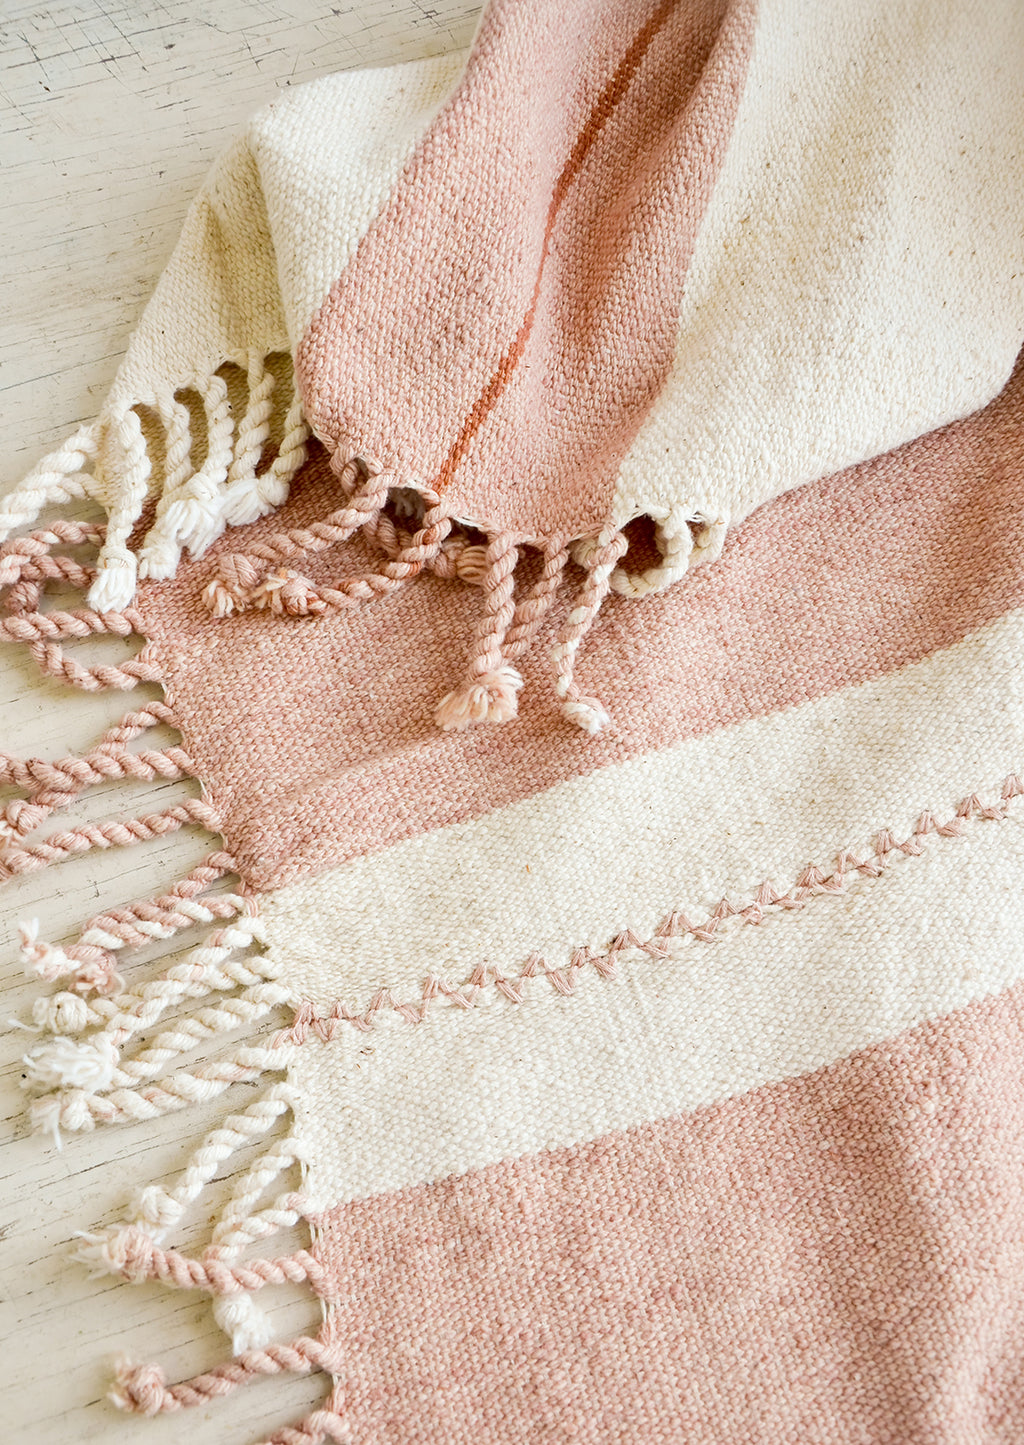 Natural / Blush: Natural woven cotton throw in blush and terracotta stripes with twisted fringe edge